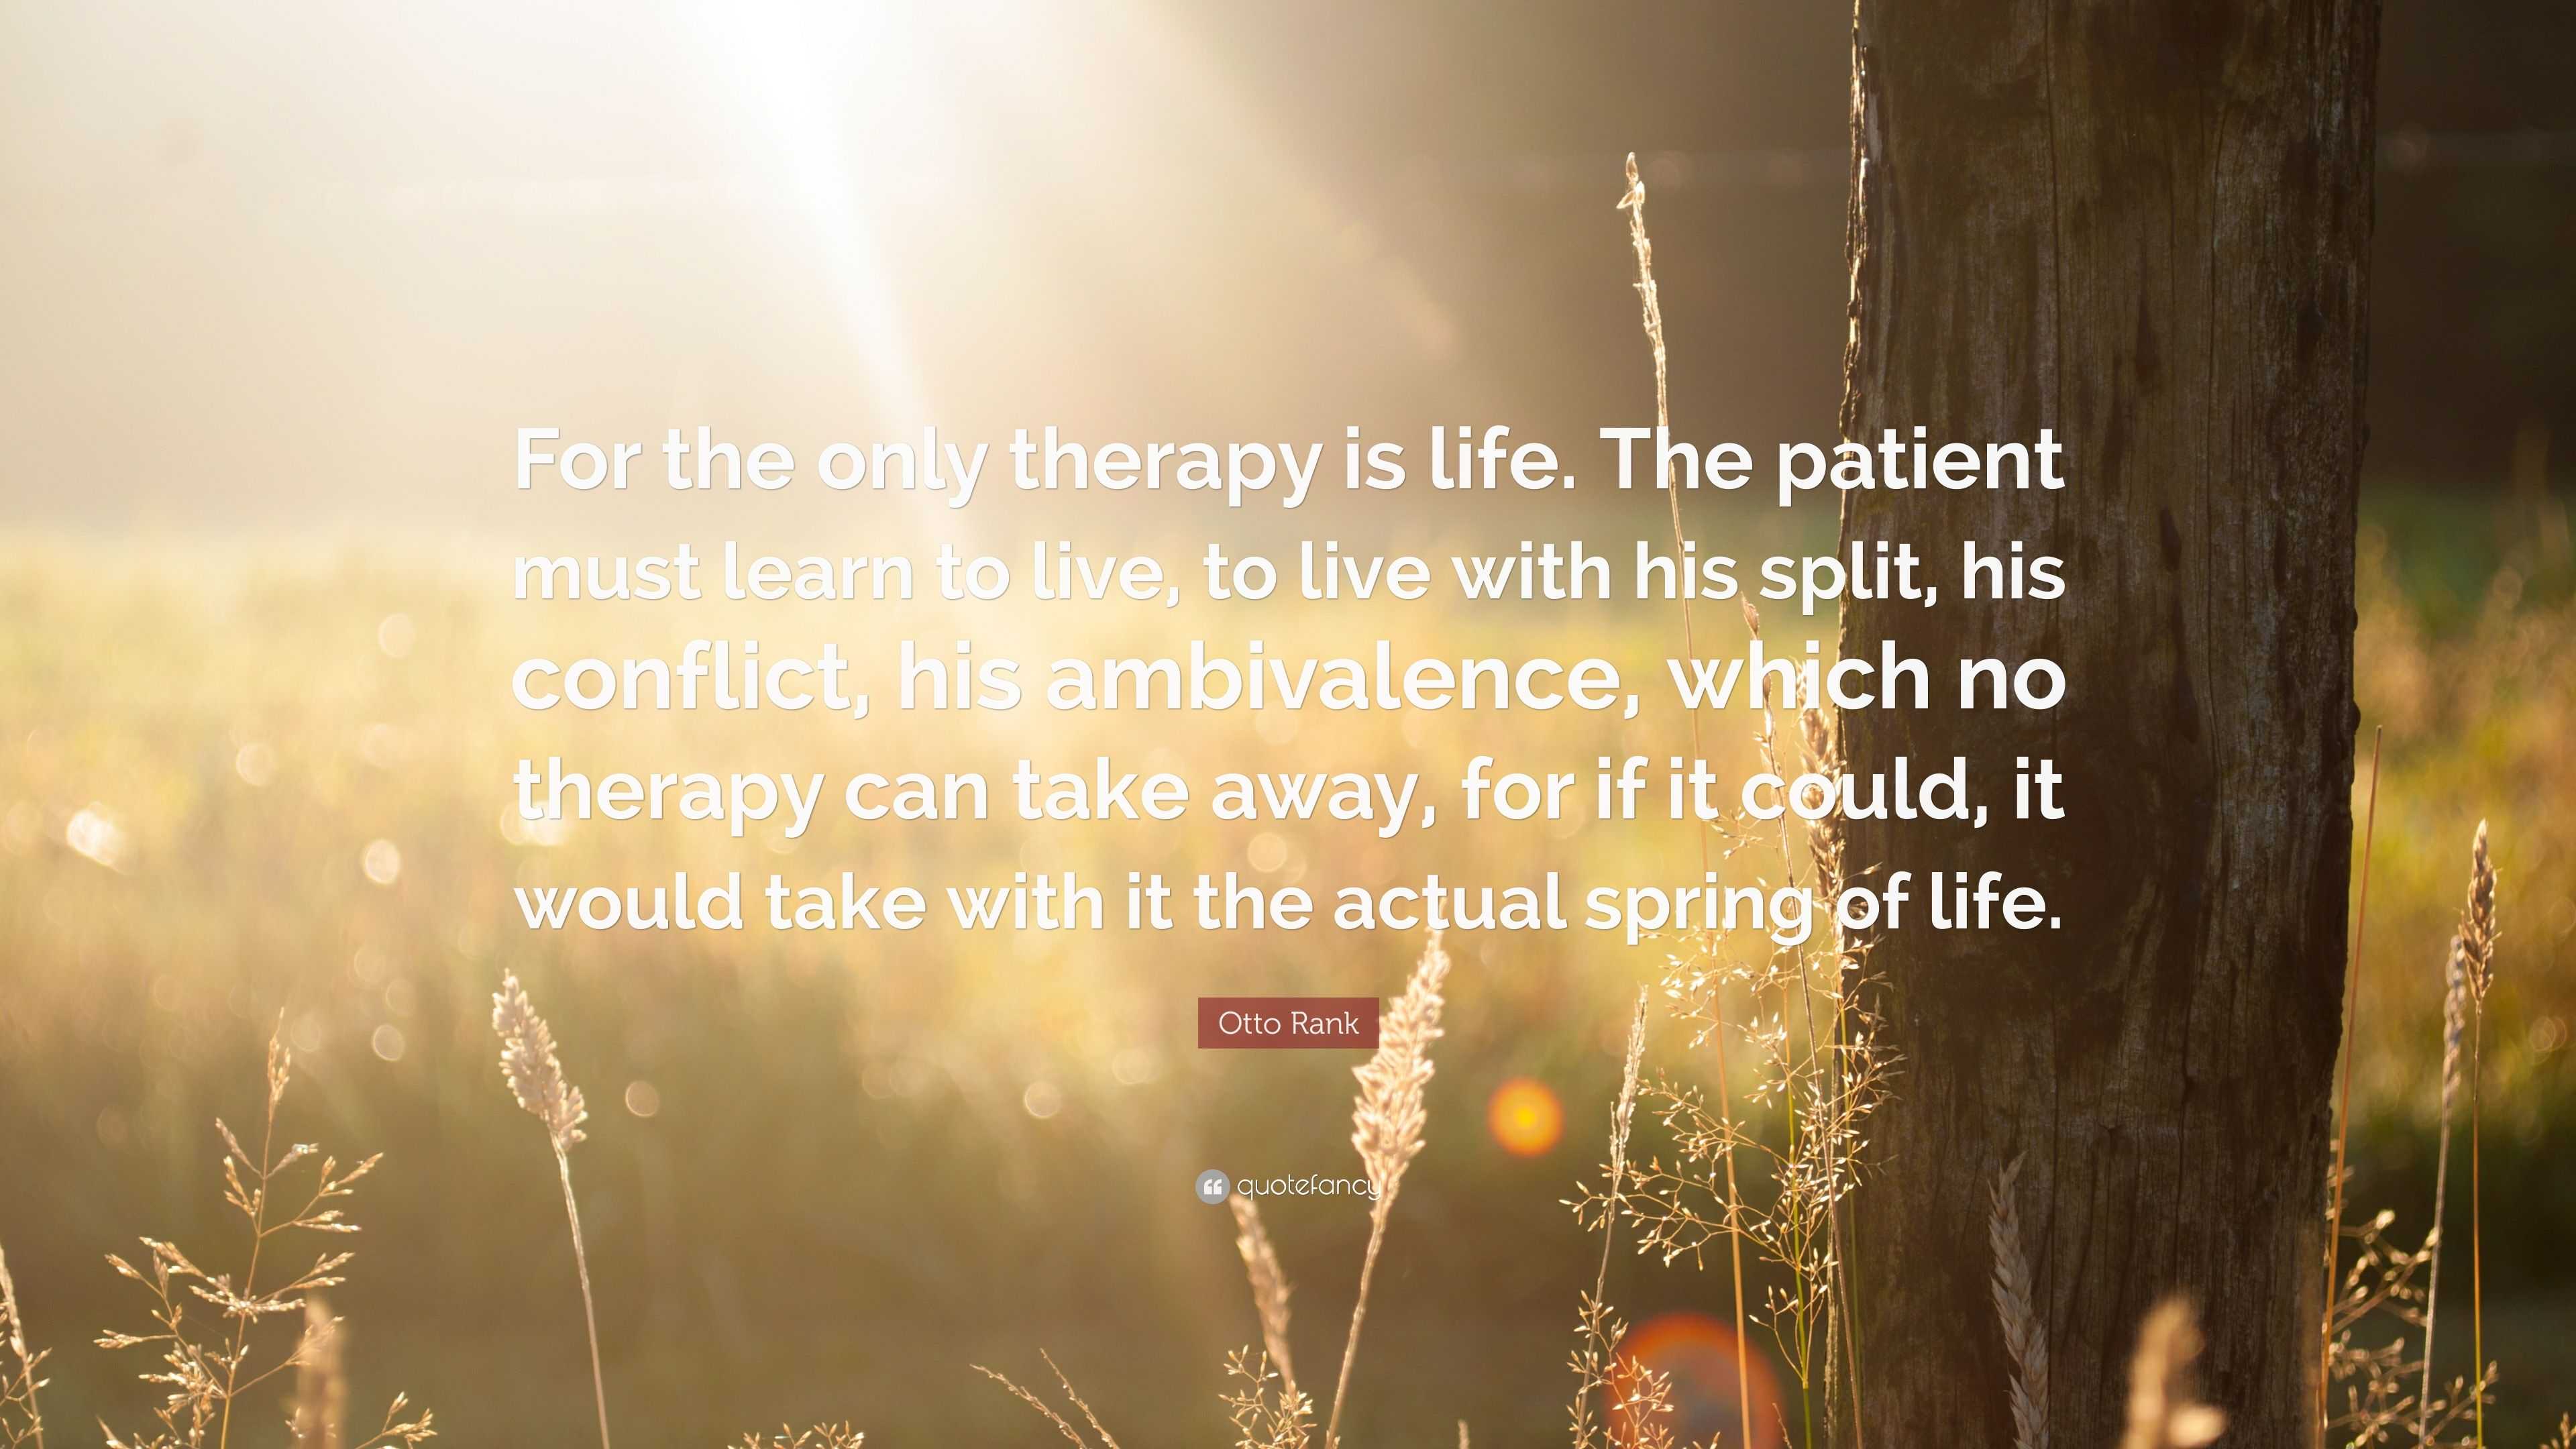 learn to live life quotes otto rank quote u201cfor the only therapy is life the patient must